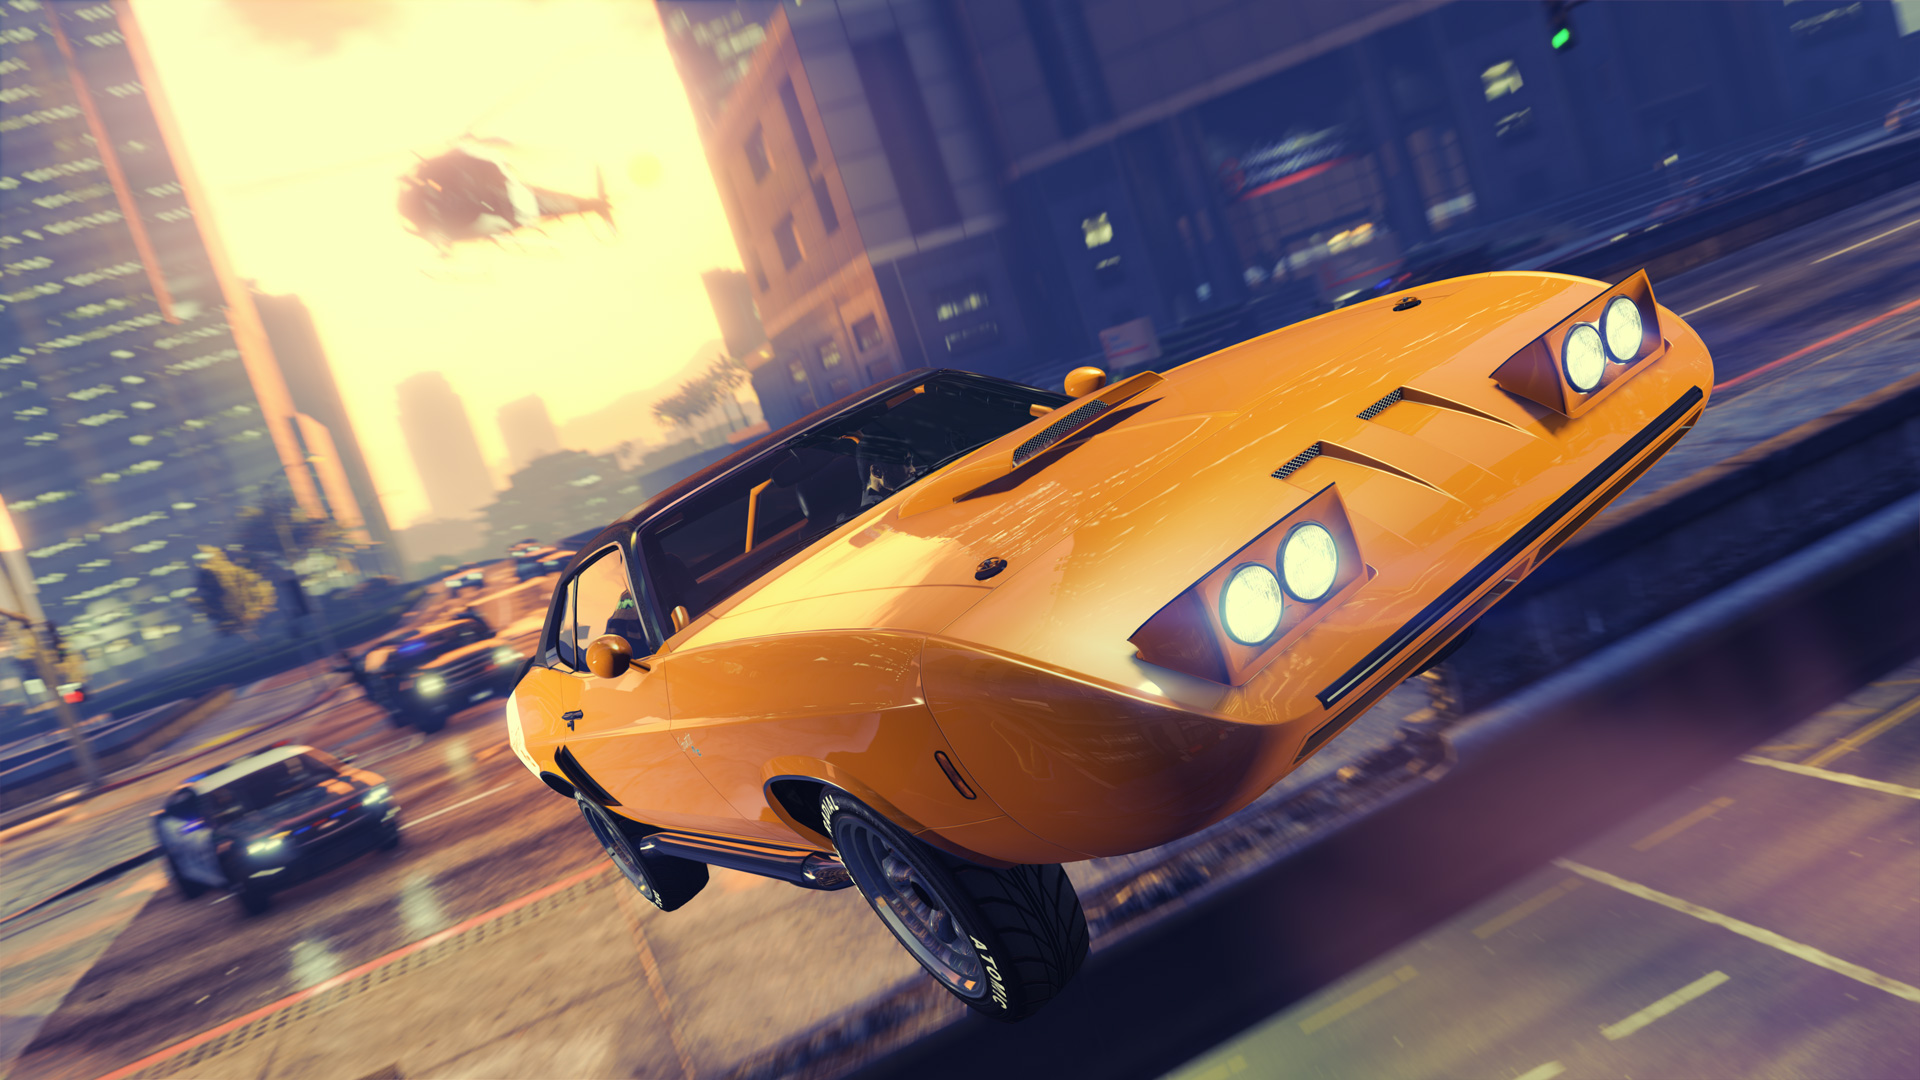 Illinois politician wants to ban Grand Theft Auto after a rise in